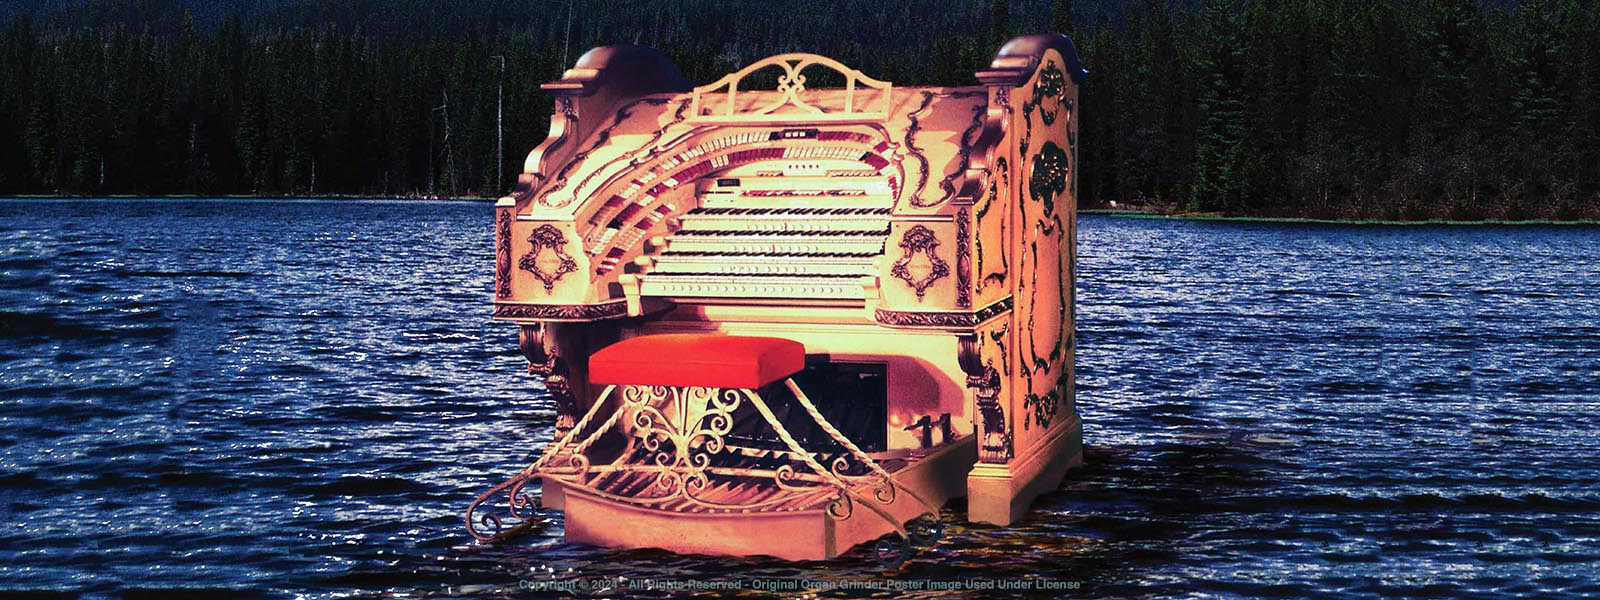 A large, richly decorated 4-manual Wurlitzer organ console sits superimposed on a mountain lake with a forest in the background.